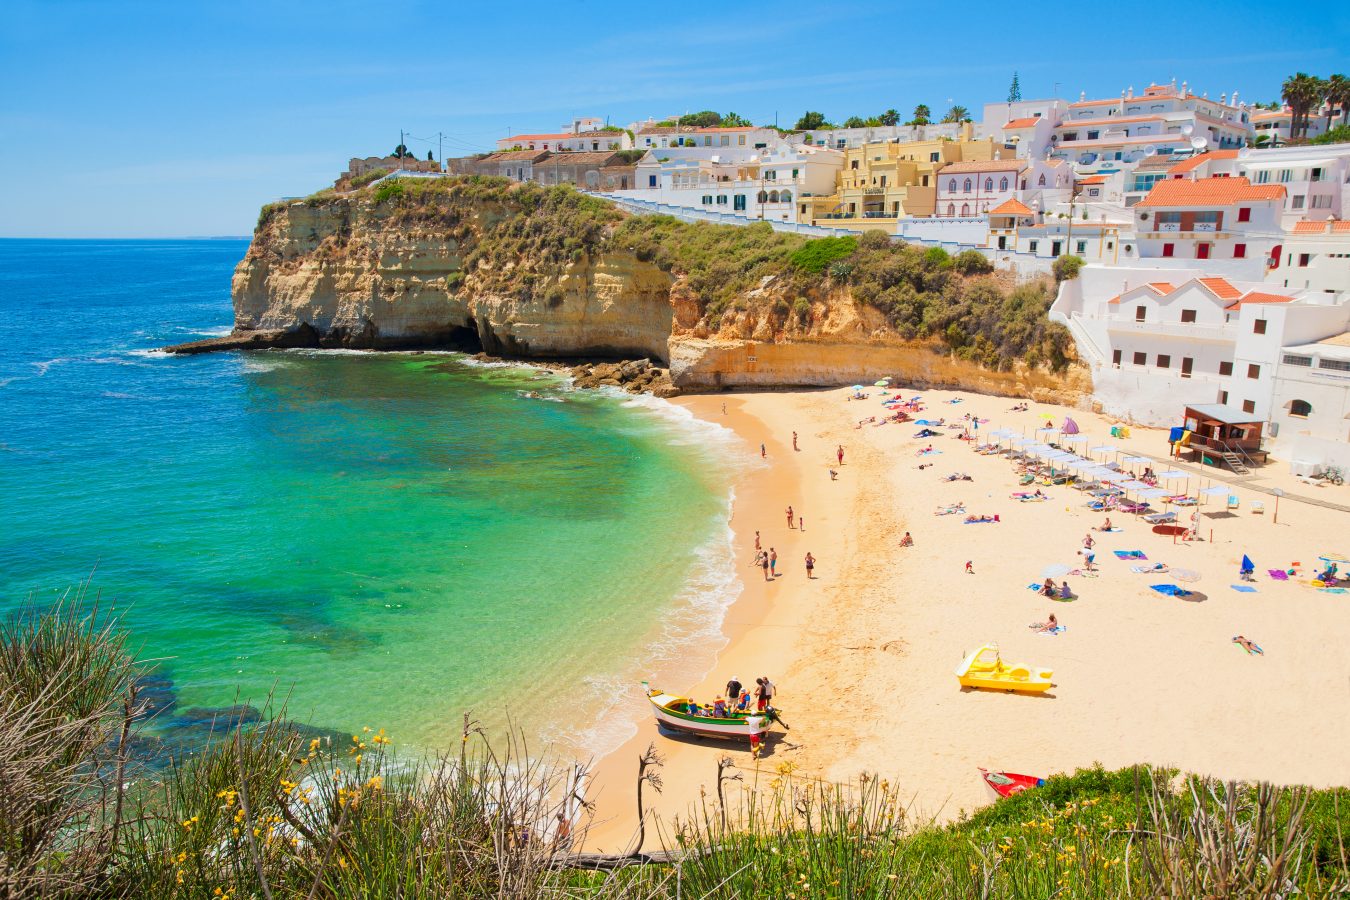 A beach in Algarve, Portugal with bright waters, light sand, and the European city in the hills behind.